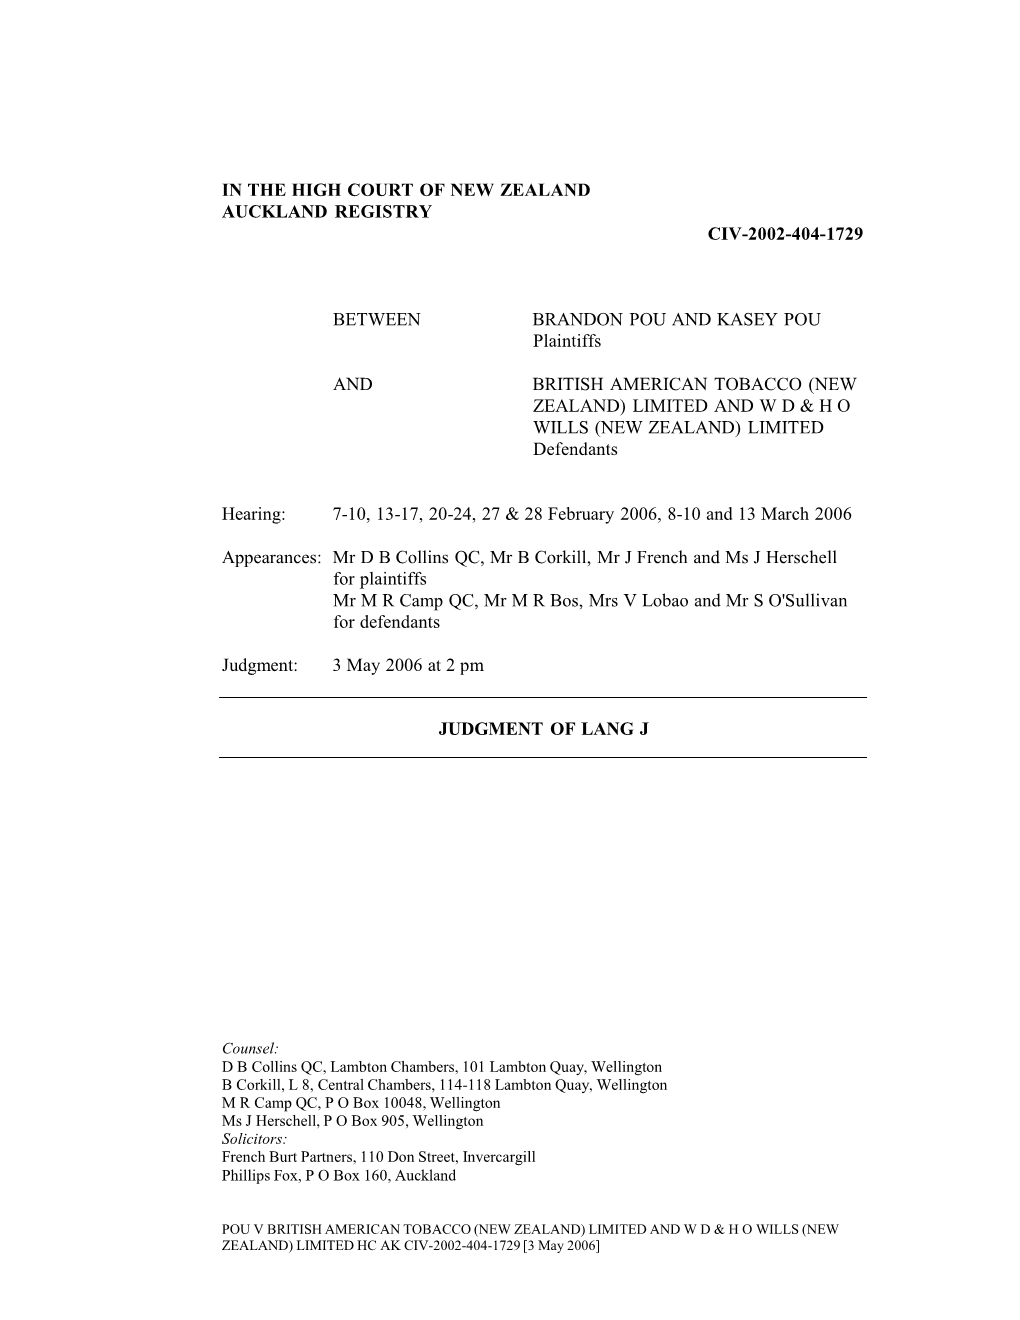 In the High Court of New Zealand Auckland Registry Civ-2002-404-1729